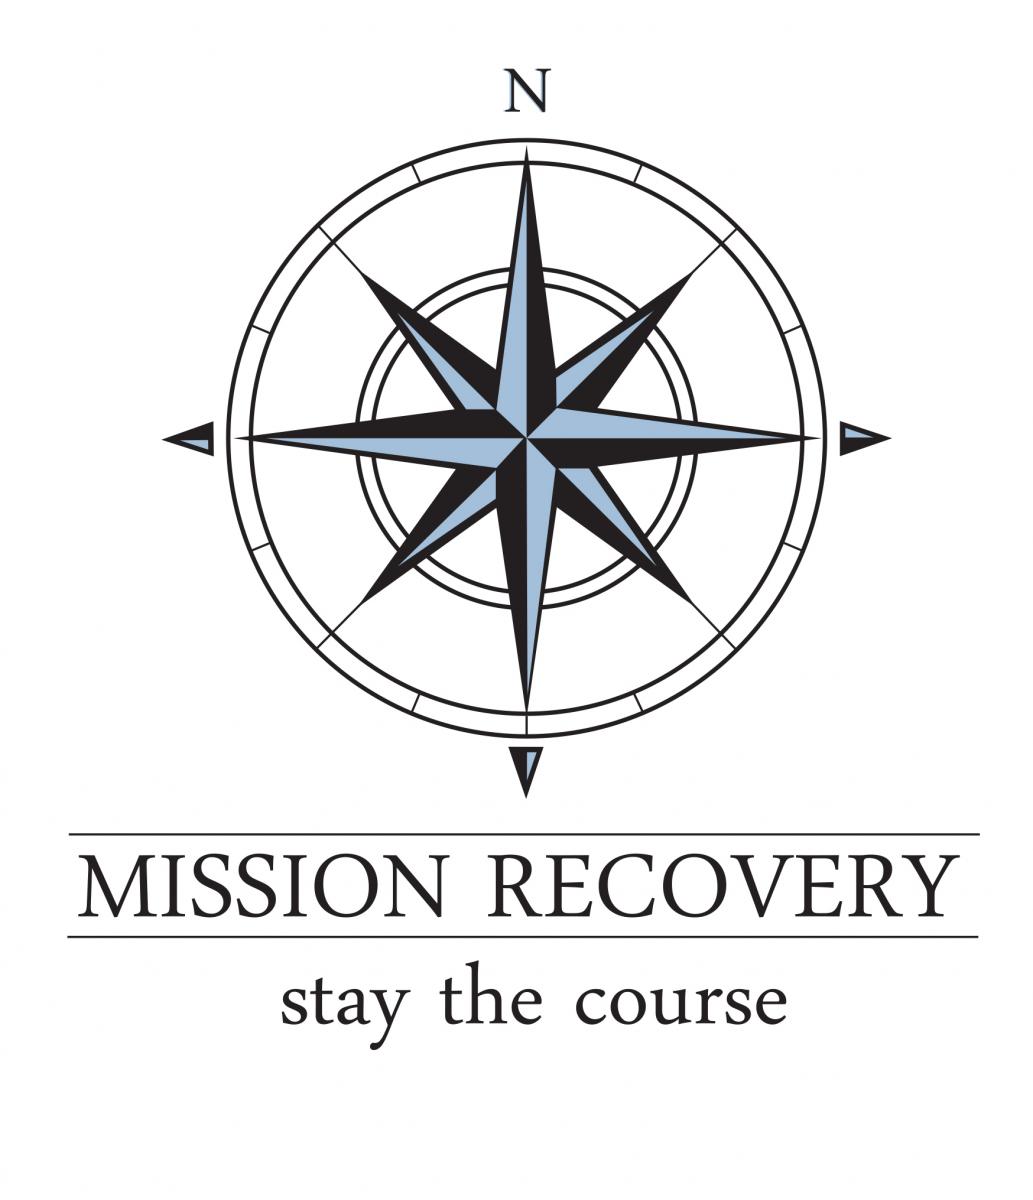 Mission Recovery logo